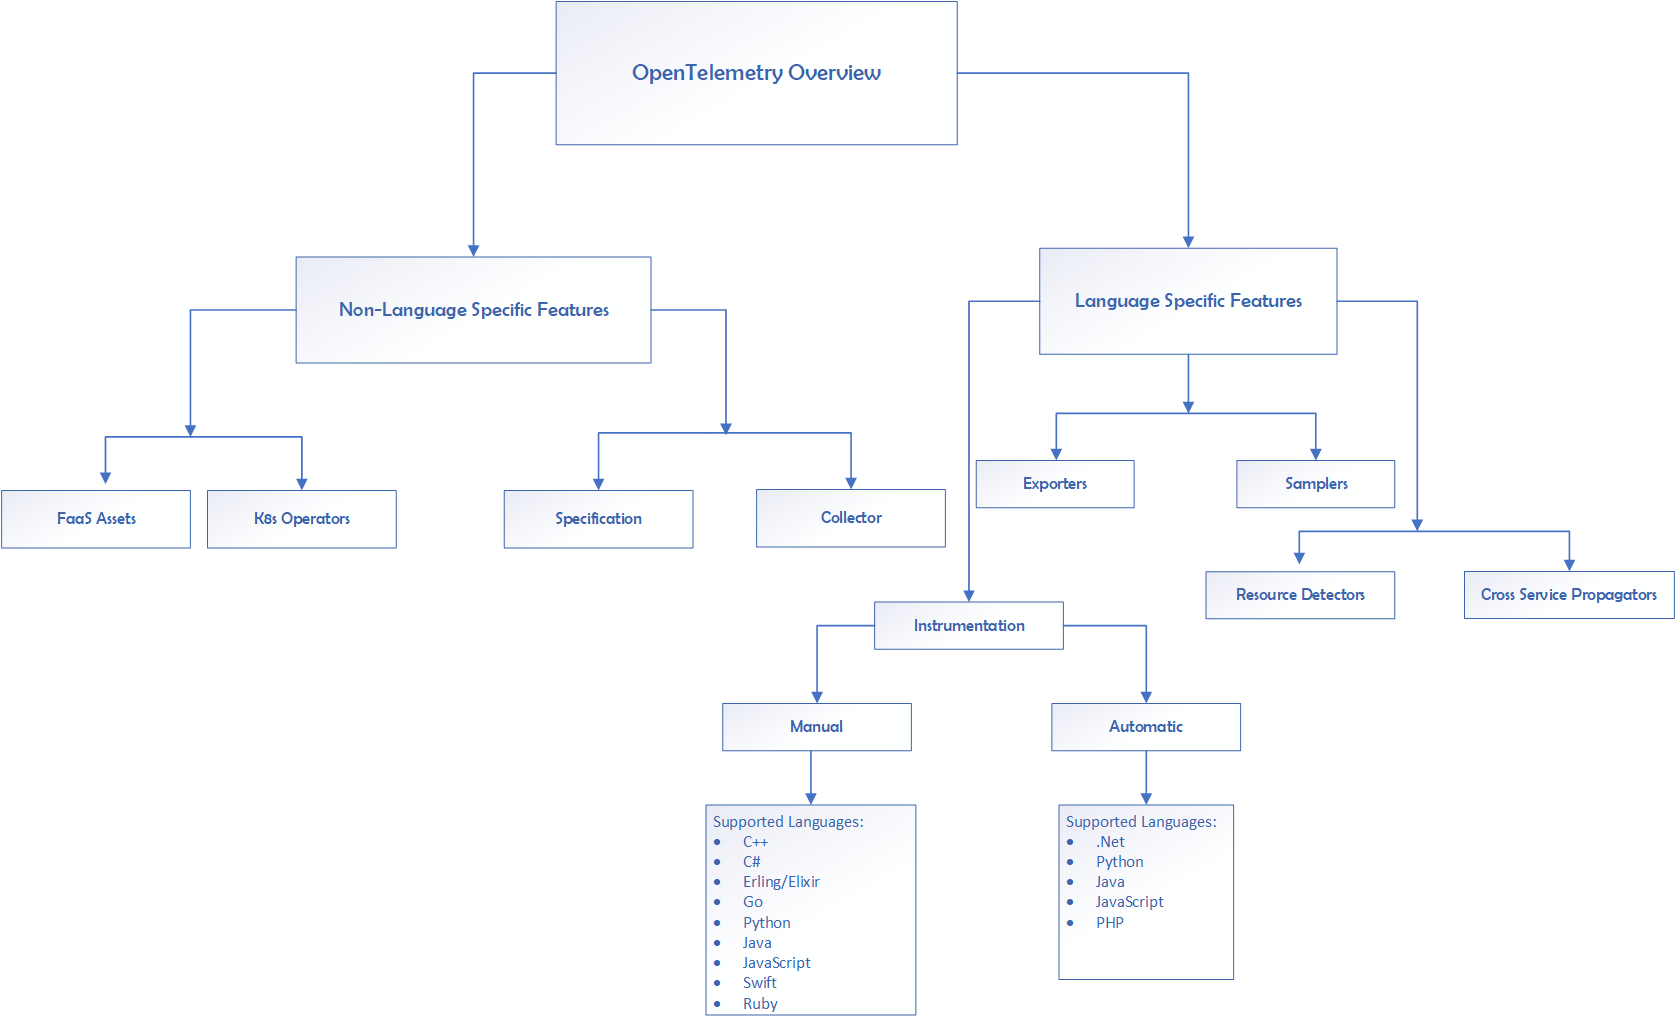 OpenTelemetry components overview